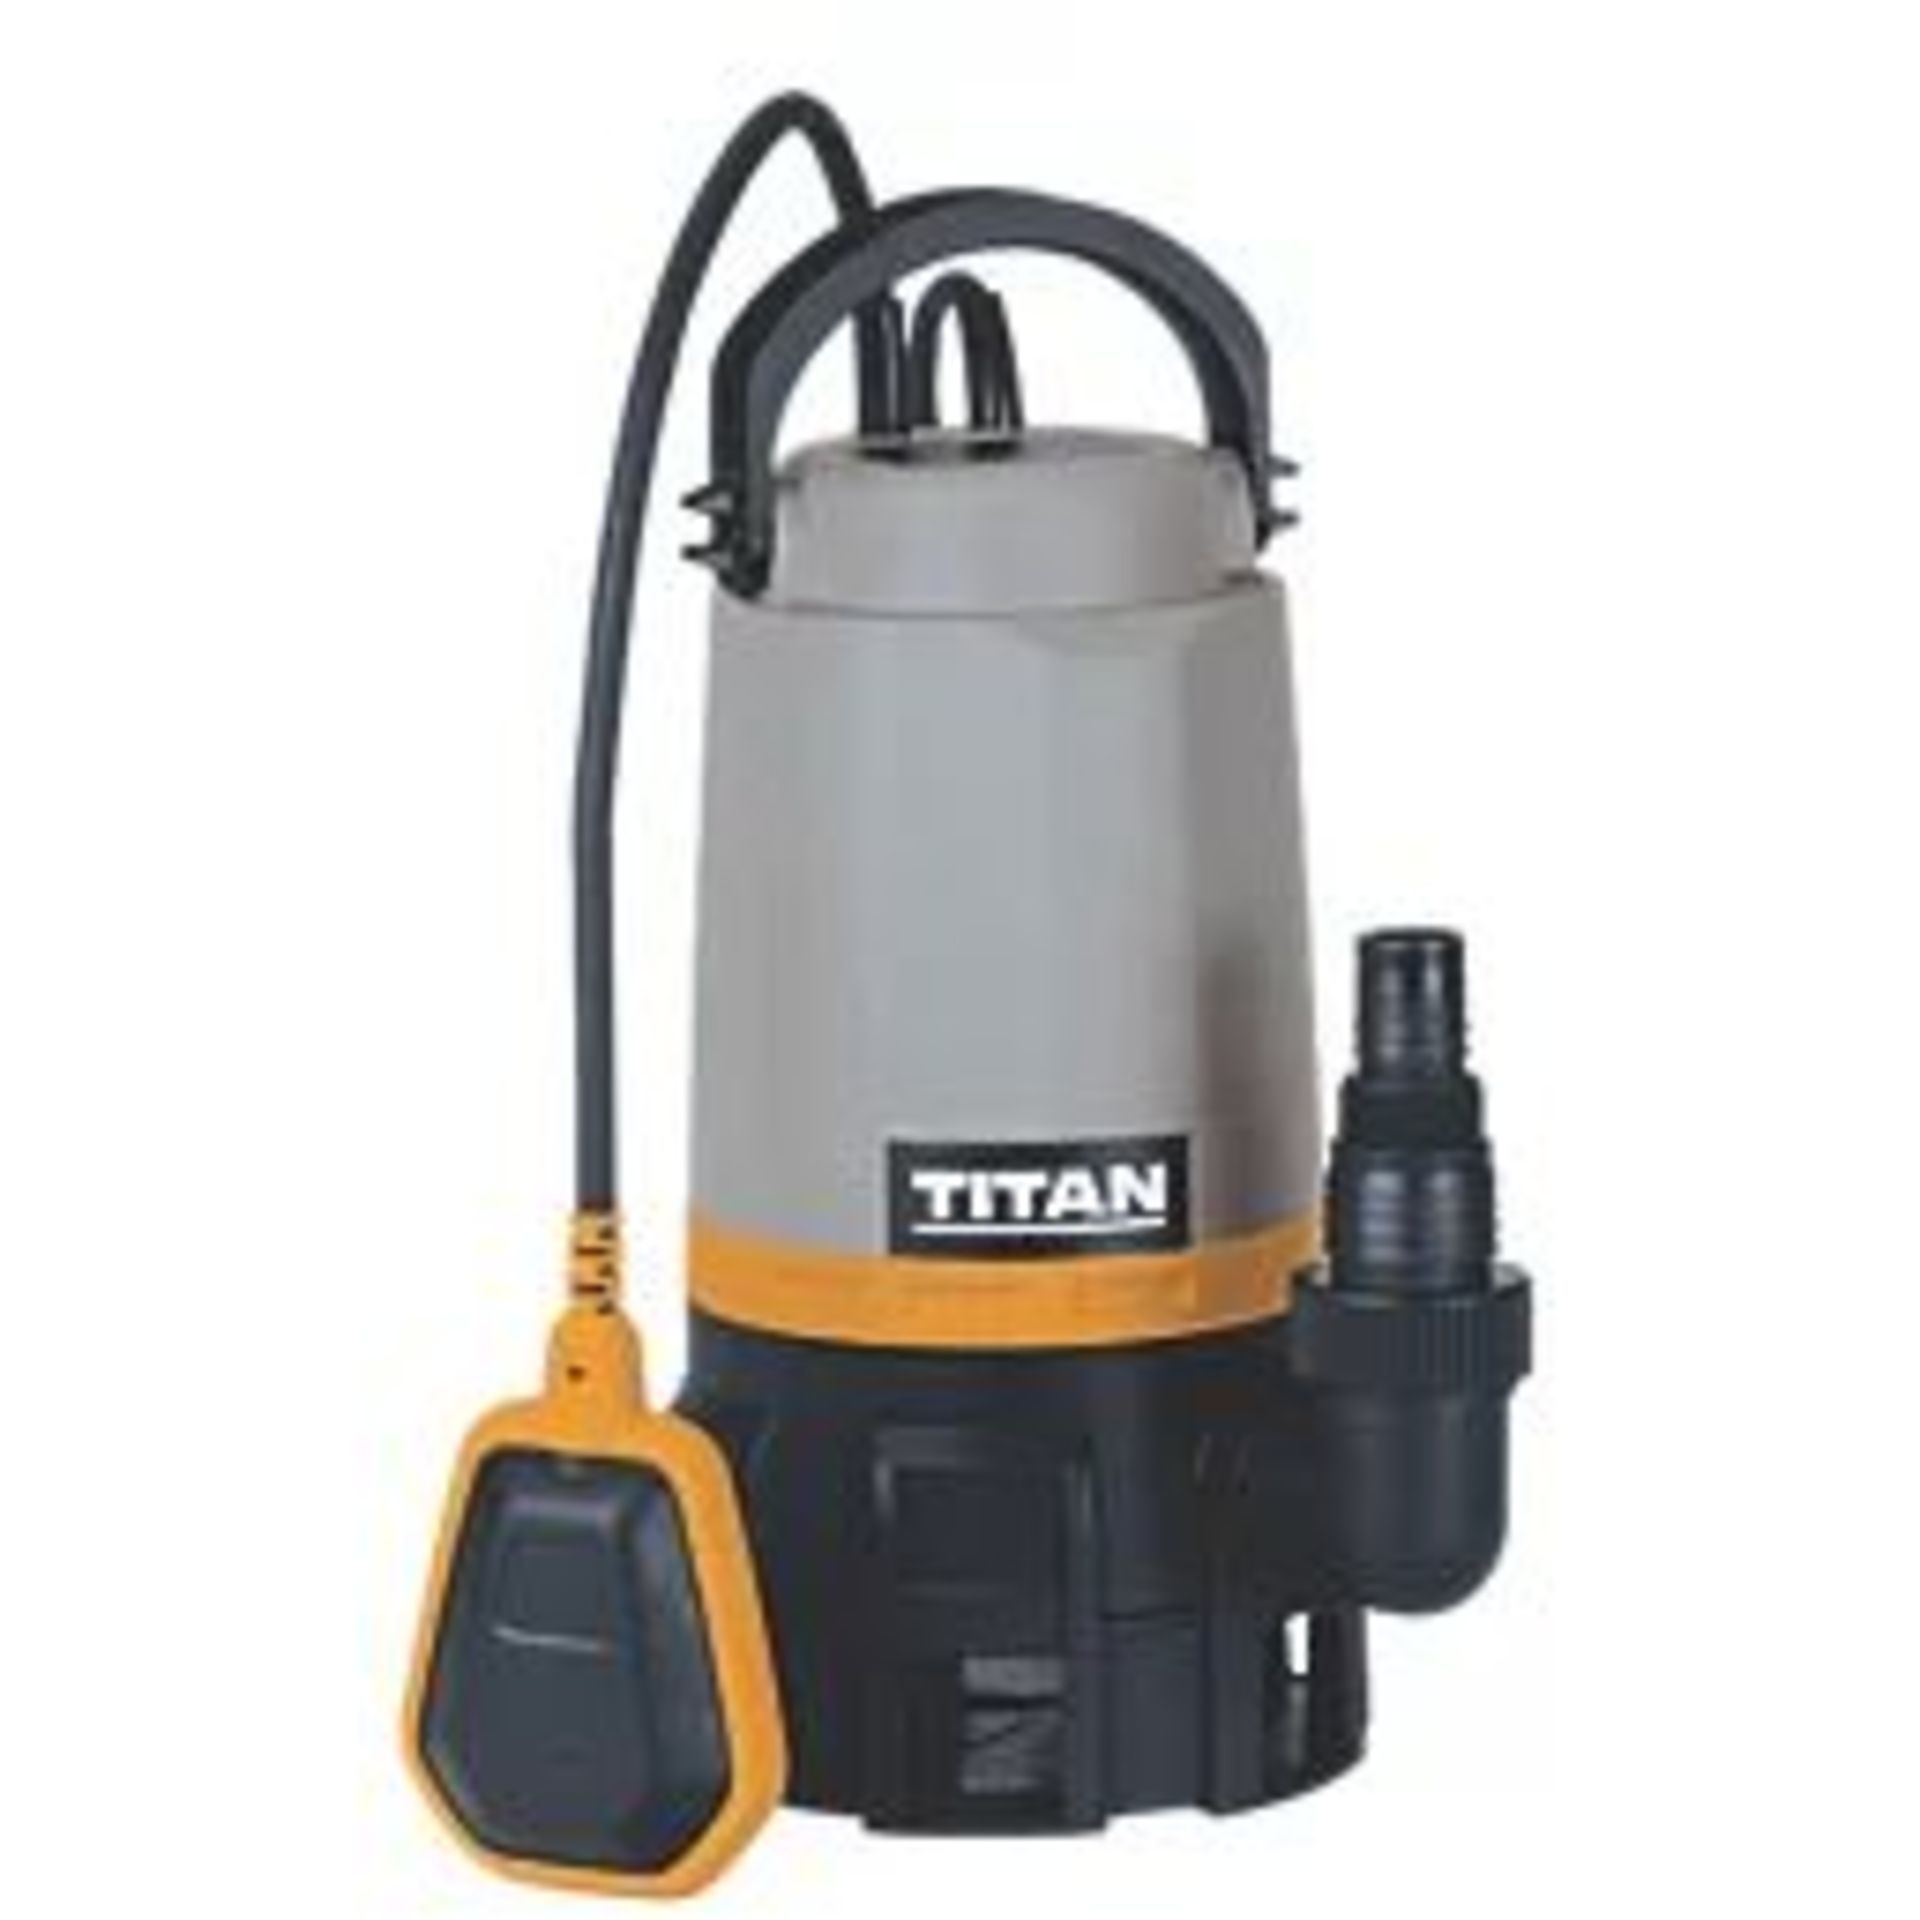 TITAN 750W MAINS-POWERED DIRTY WATER PUMP. - S2. Suitable for submersion, quickly clearing large